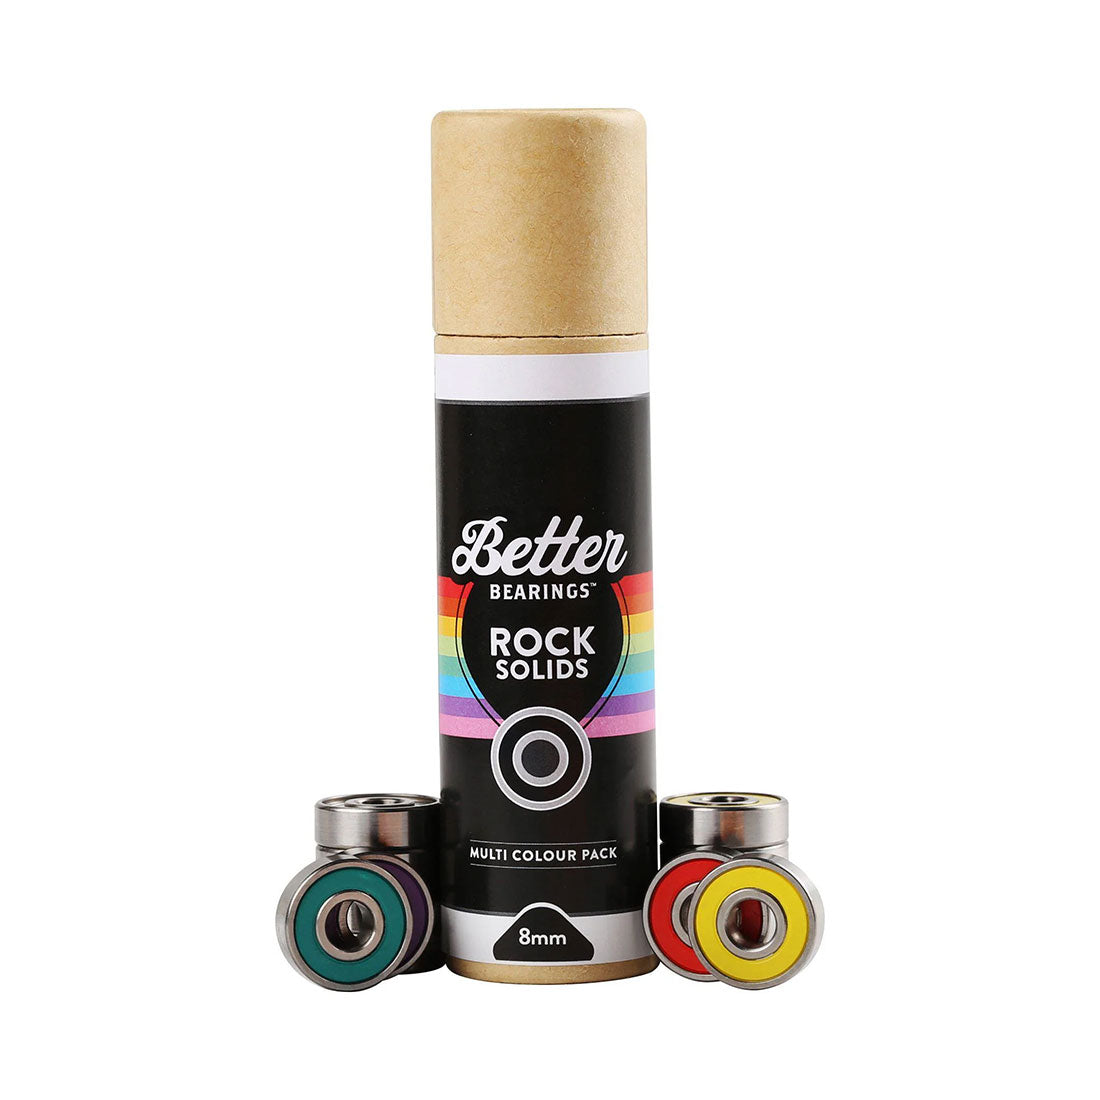 Better Bearings Rock Solids 8mm 16pk Multicolour Inline and Quad Bearings